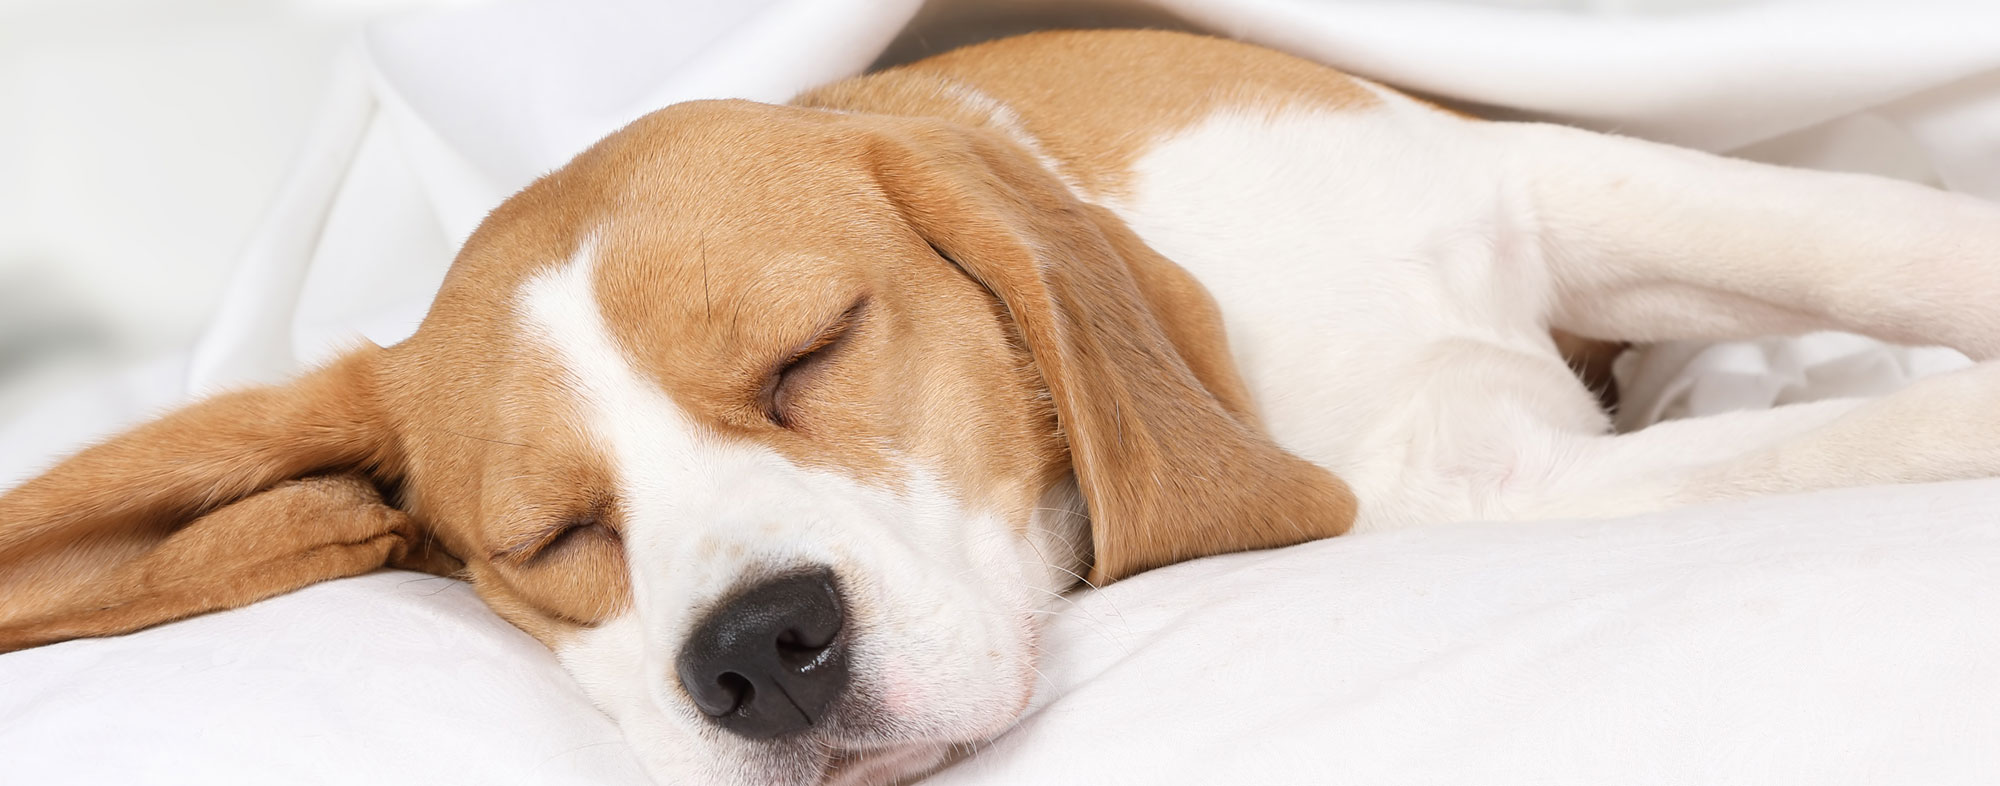 Your dog's sleeping could be affected by dehydration and diet